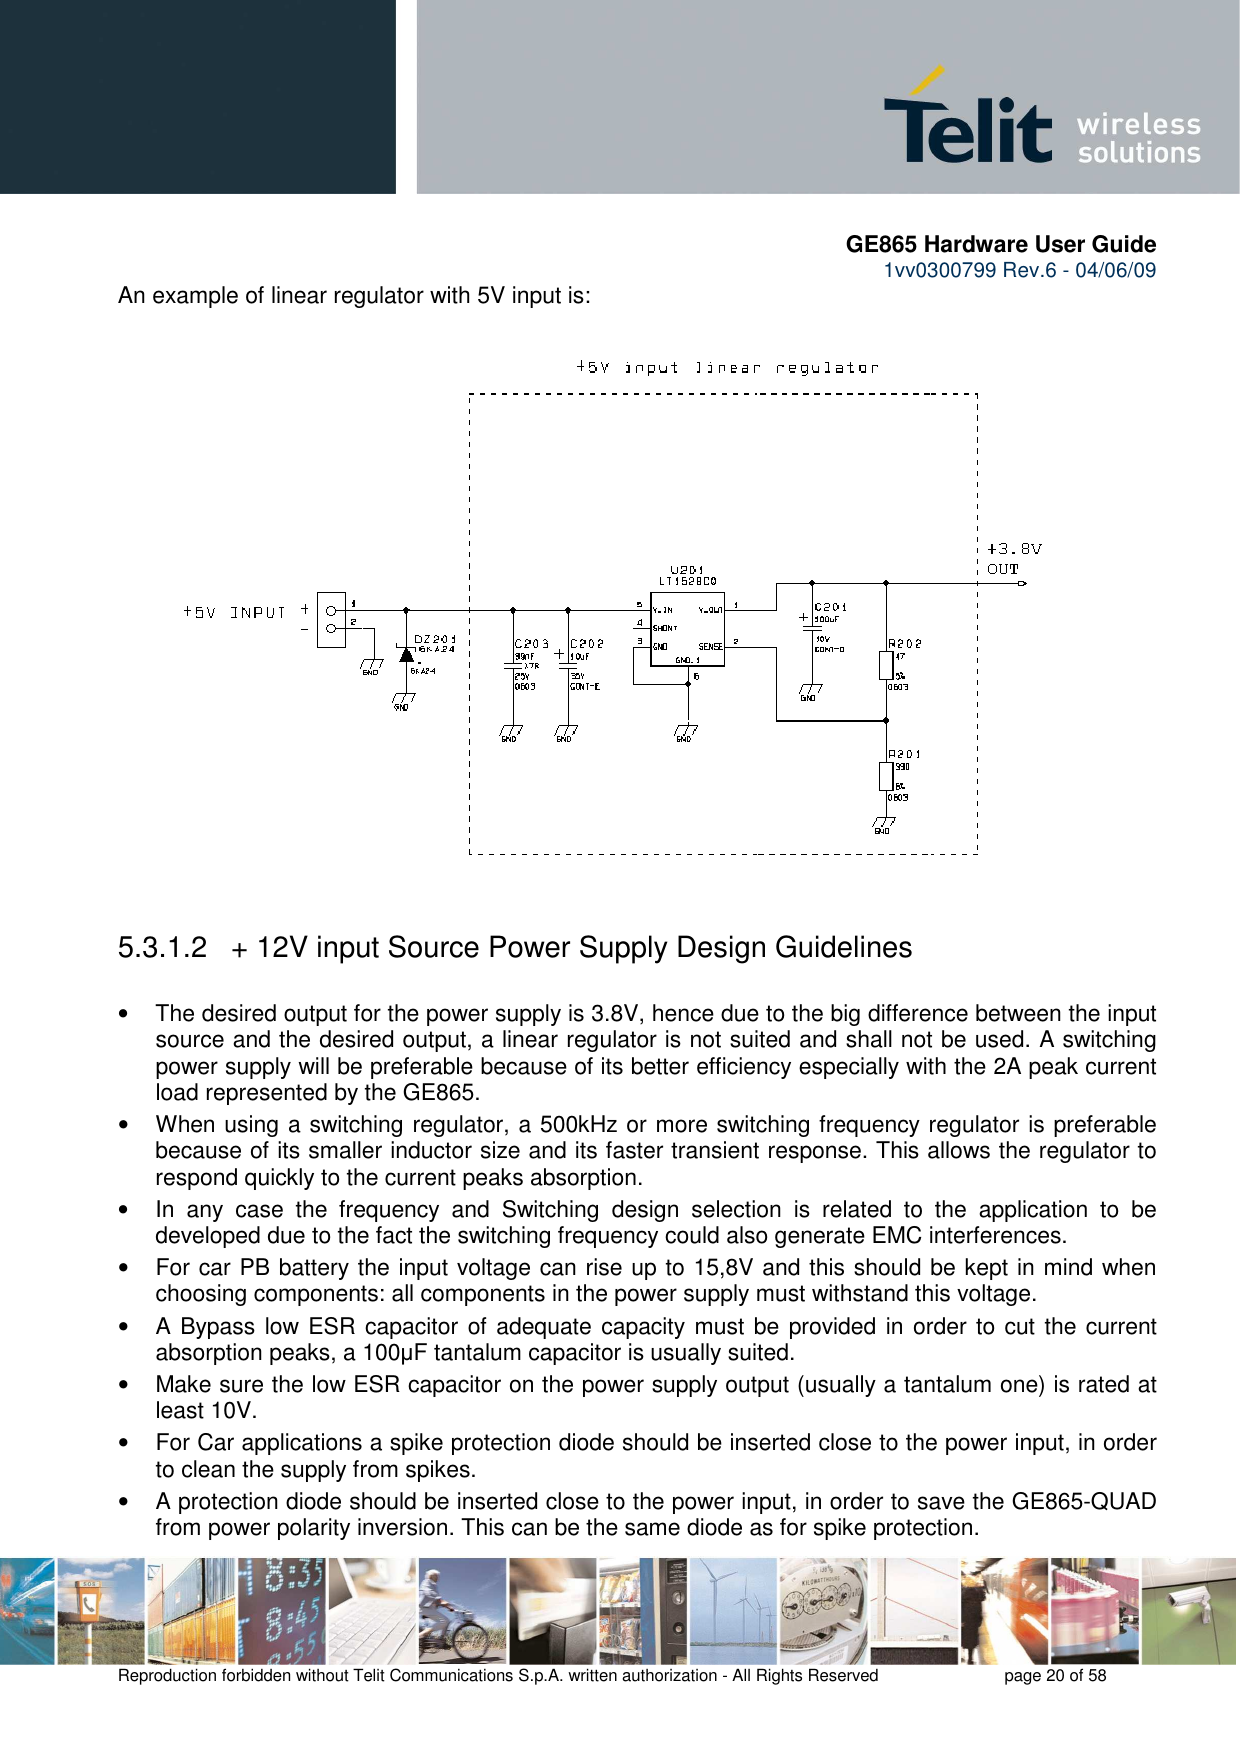       GE865 Hardware User Guide 1vv0300799 Rev.6 - 04/06/09      Reproduction forbidden without Telit Communications S.p.A. written authorization - All Rights Reserved    page 20 of 58  An example of linear regulator with 5V input is:    5.3.1.2   + 12V input Source Power Supply Design Guidelines  •  The desired output for the power supply is 3.8V, hence due to the big difference between the input source and the desired output, a linear regulator is not suited and shall not be used. A switching power supply will be preferable because of its better efficiency especially with the 2A peak current load represented by the GE865. •  When using a switching regulator, a 500kHz or more switching frequency regulator is preferable because of its smaller inductor size and its faster transient response. This allows the regulator to respond quickly to the current peaks absorption.  •  In  any  case  the  frequency  and  Switching  design  selection  is  related  to  the  application  to  be developed due to the fact the switching frequency could also generate EMC interferences. •  For car PB battery the input voltage can rise up to 15,8V and this should be kept in mind when choosing components: all components in the power supply must withstand this voltage. •  A  Bypass low ESR capacitor  of adequate capacity must be provided in order to cut the current absorption peaks, a 100µF tantalum capacitor is usually suited. •  Make sure the low ESR capacitor on the power supply output (usually a tantalum one) is rated at least 10V. •  For Car applications a spike protection diode should be inserted close to the power input, in order to clean the supply from spikes.  •  A protection diode should be inserted close to the power input, in order to save the GE865-QUAD from power polarity inversion. This can be the same diode as for spike protection. 